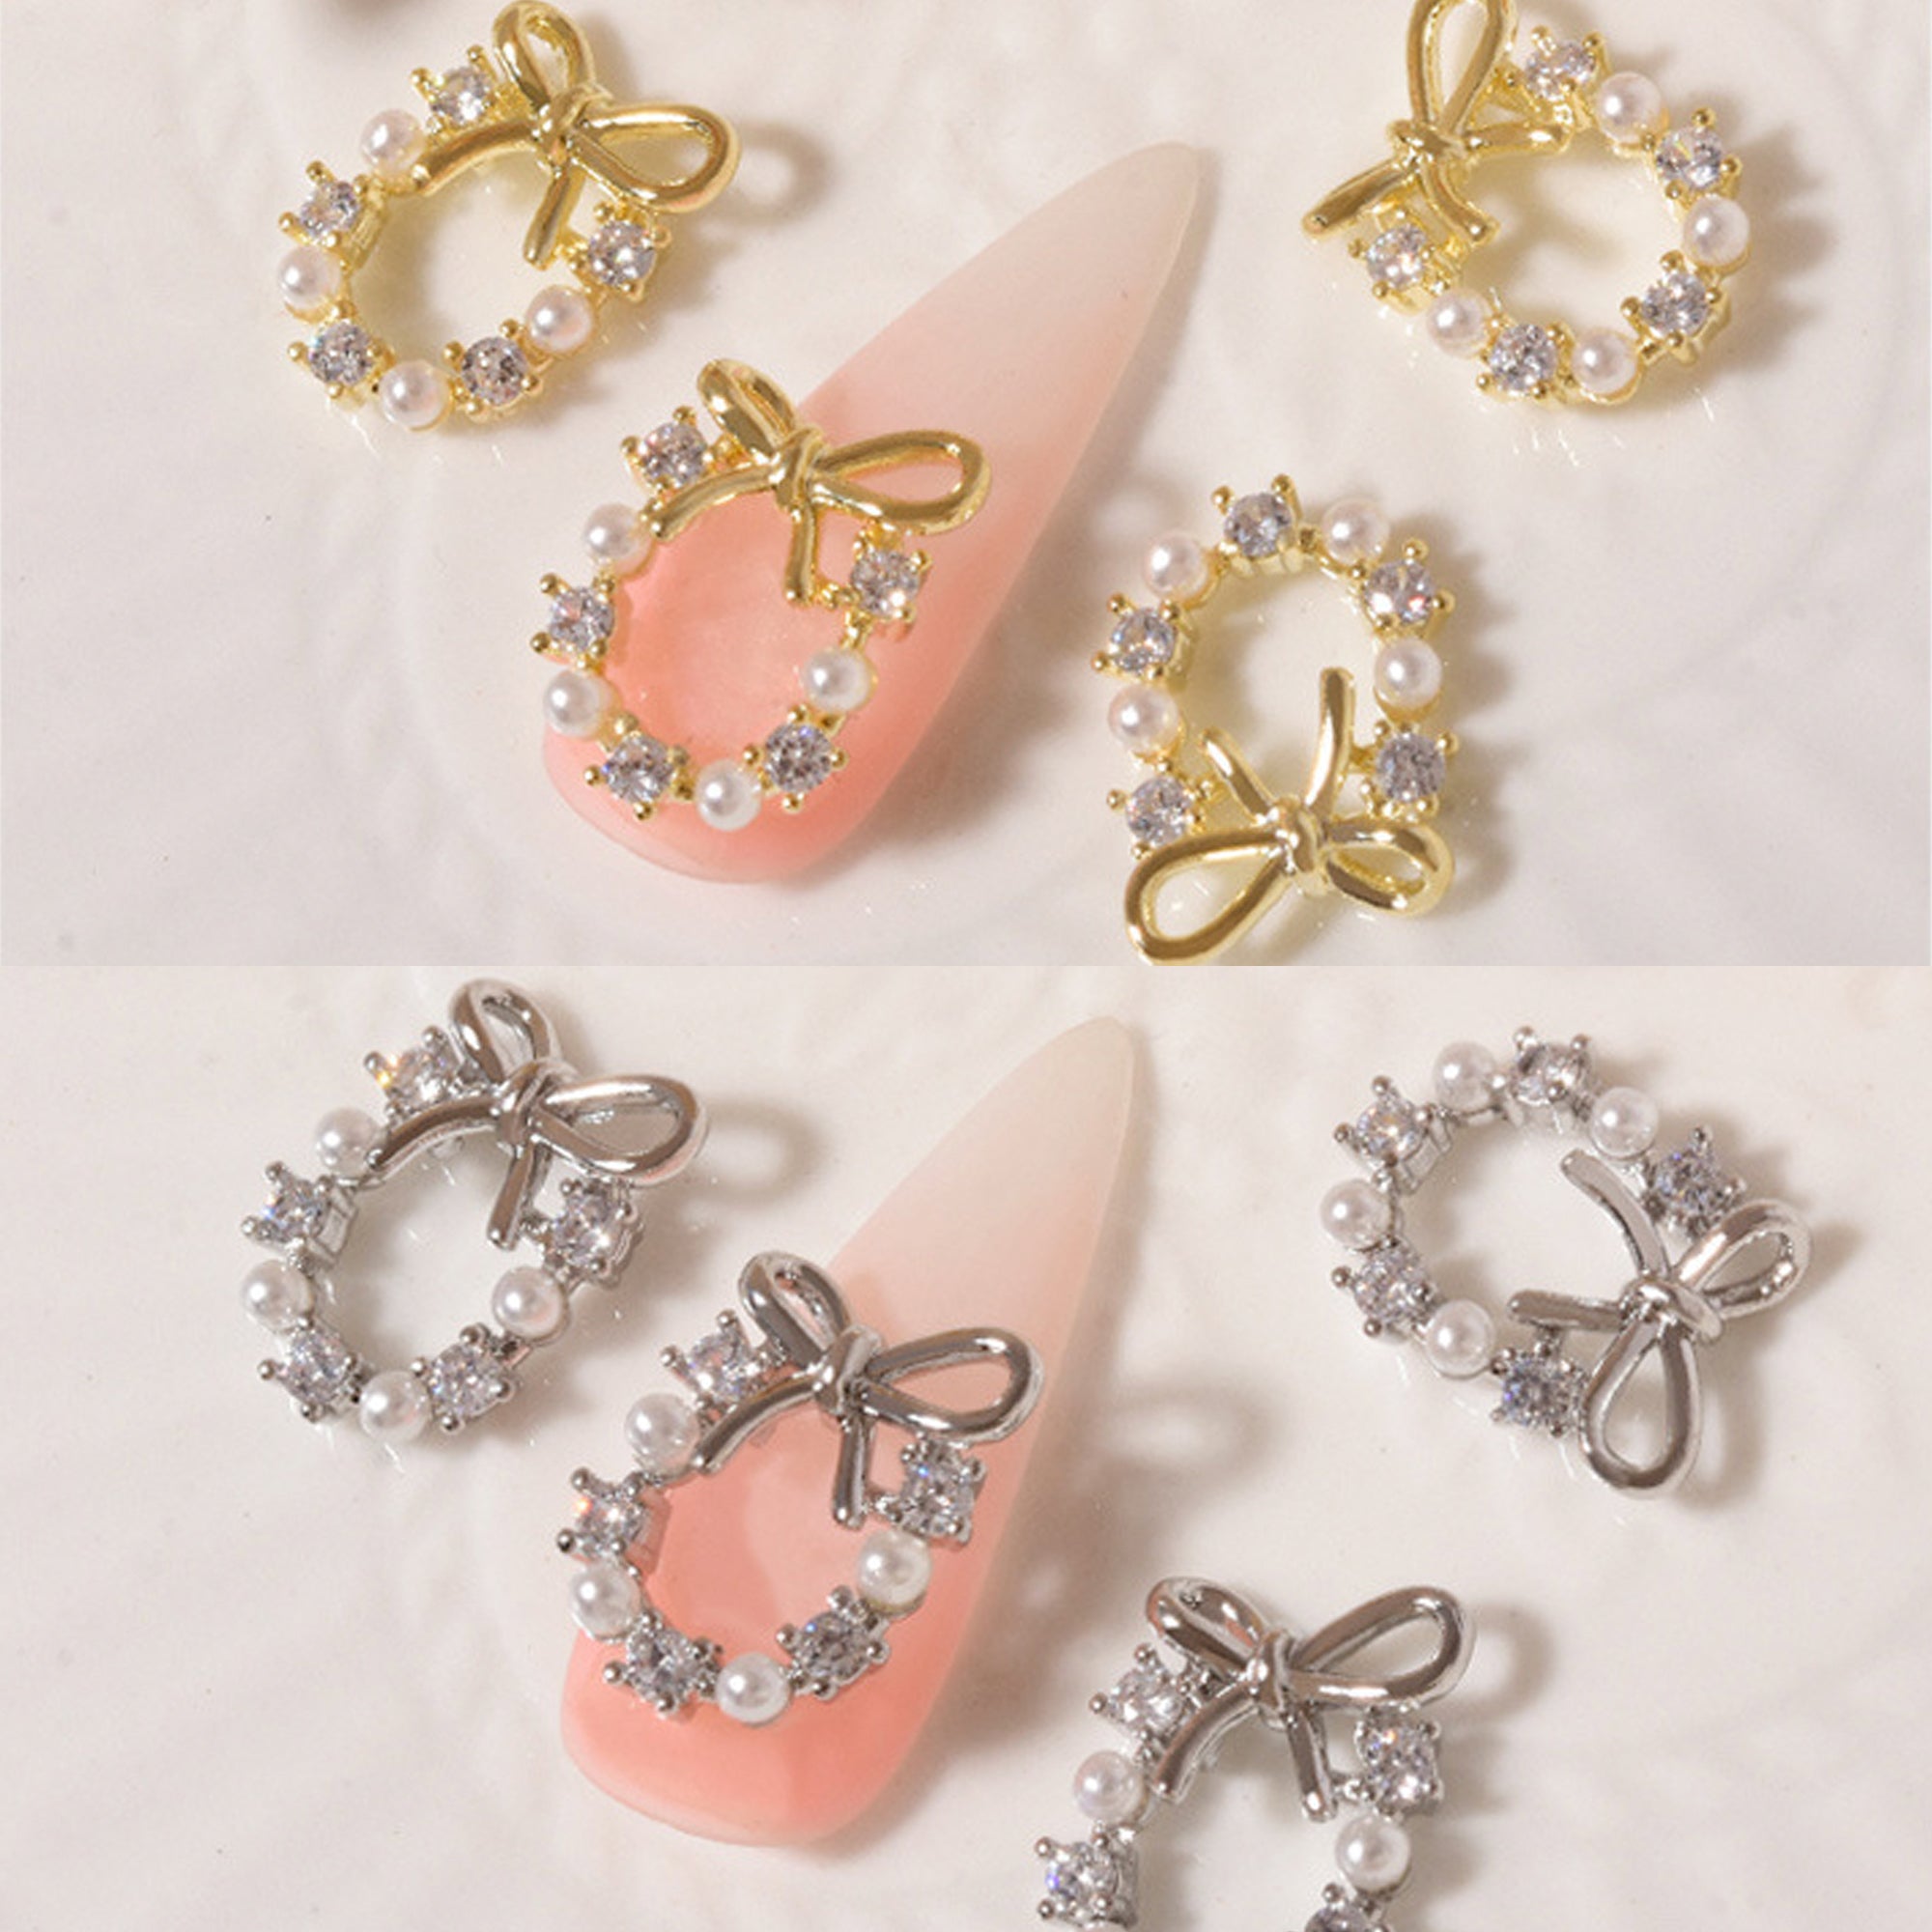 Zircon Nail Charms with Pearl - Christmas Wreath